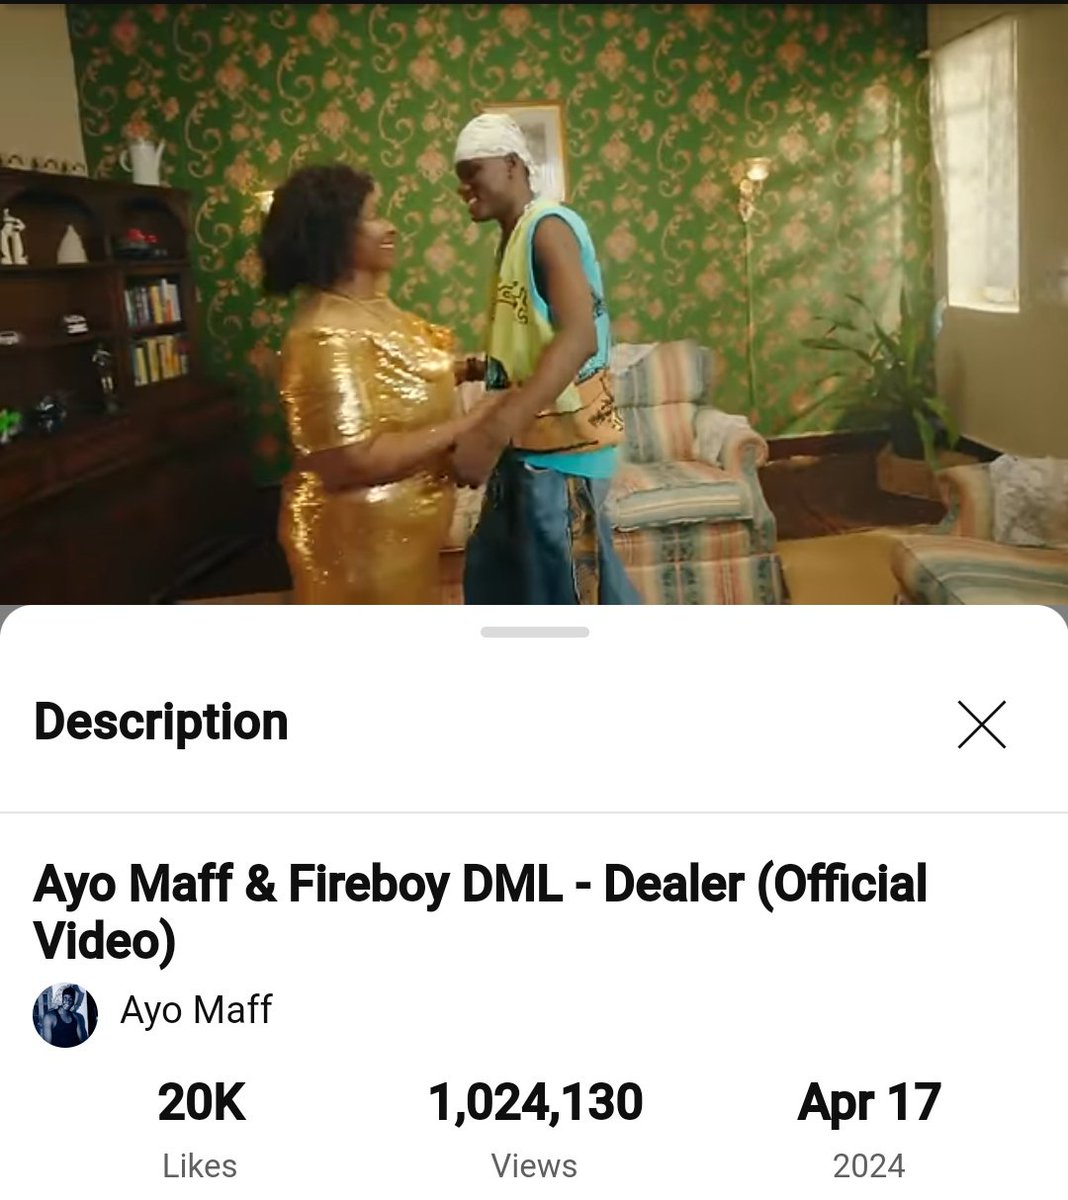 Ayo Maff's first video to reach a million views on YouTube. The first of many. ❤